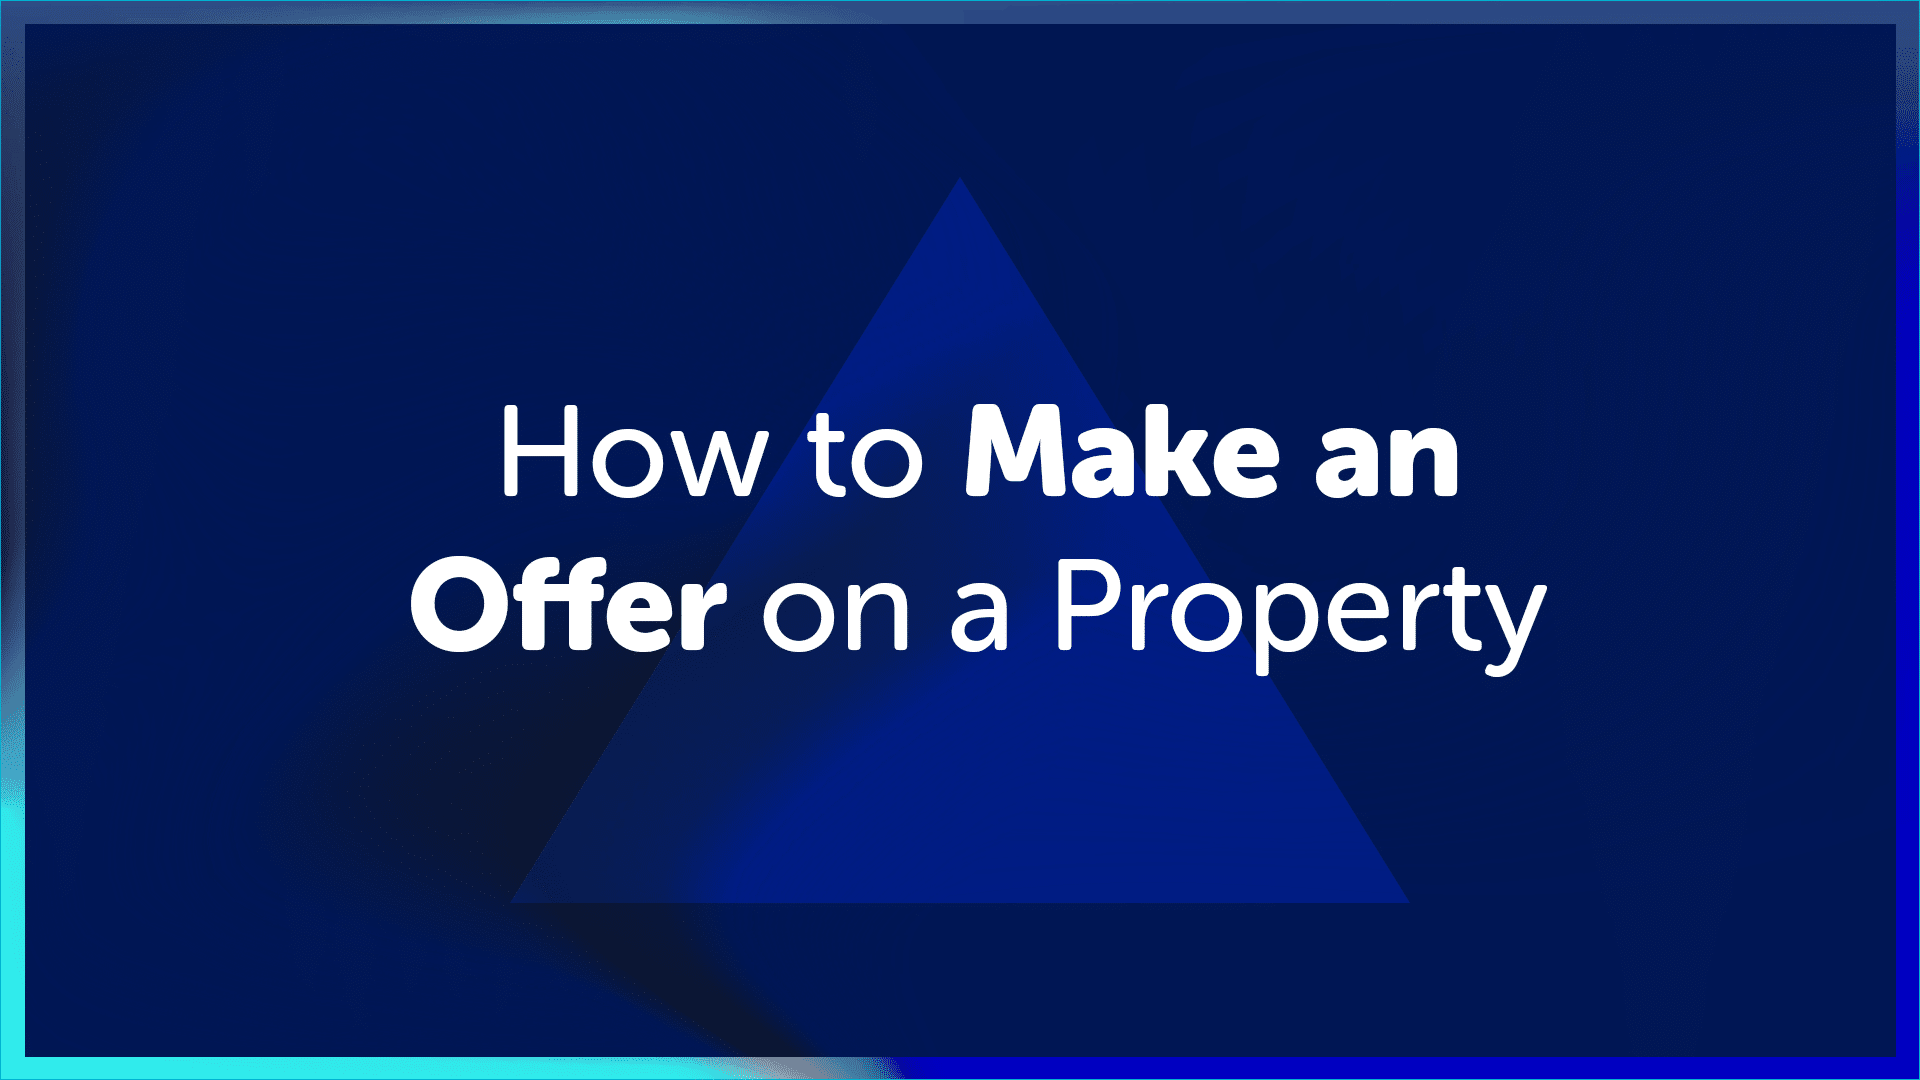 How to Make an Offer on a Property in Harrogate